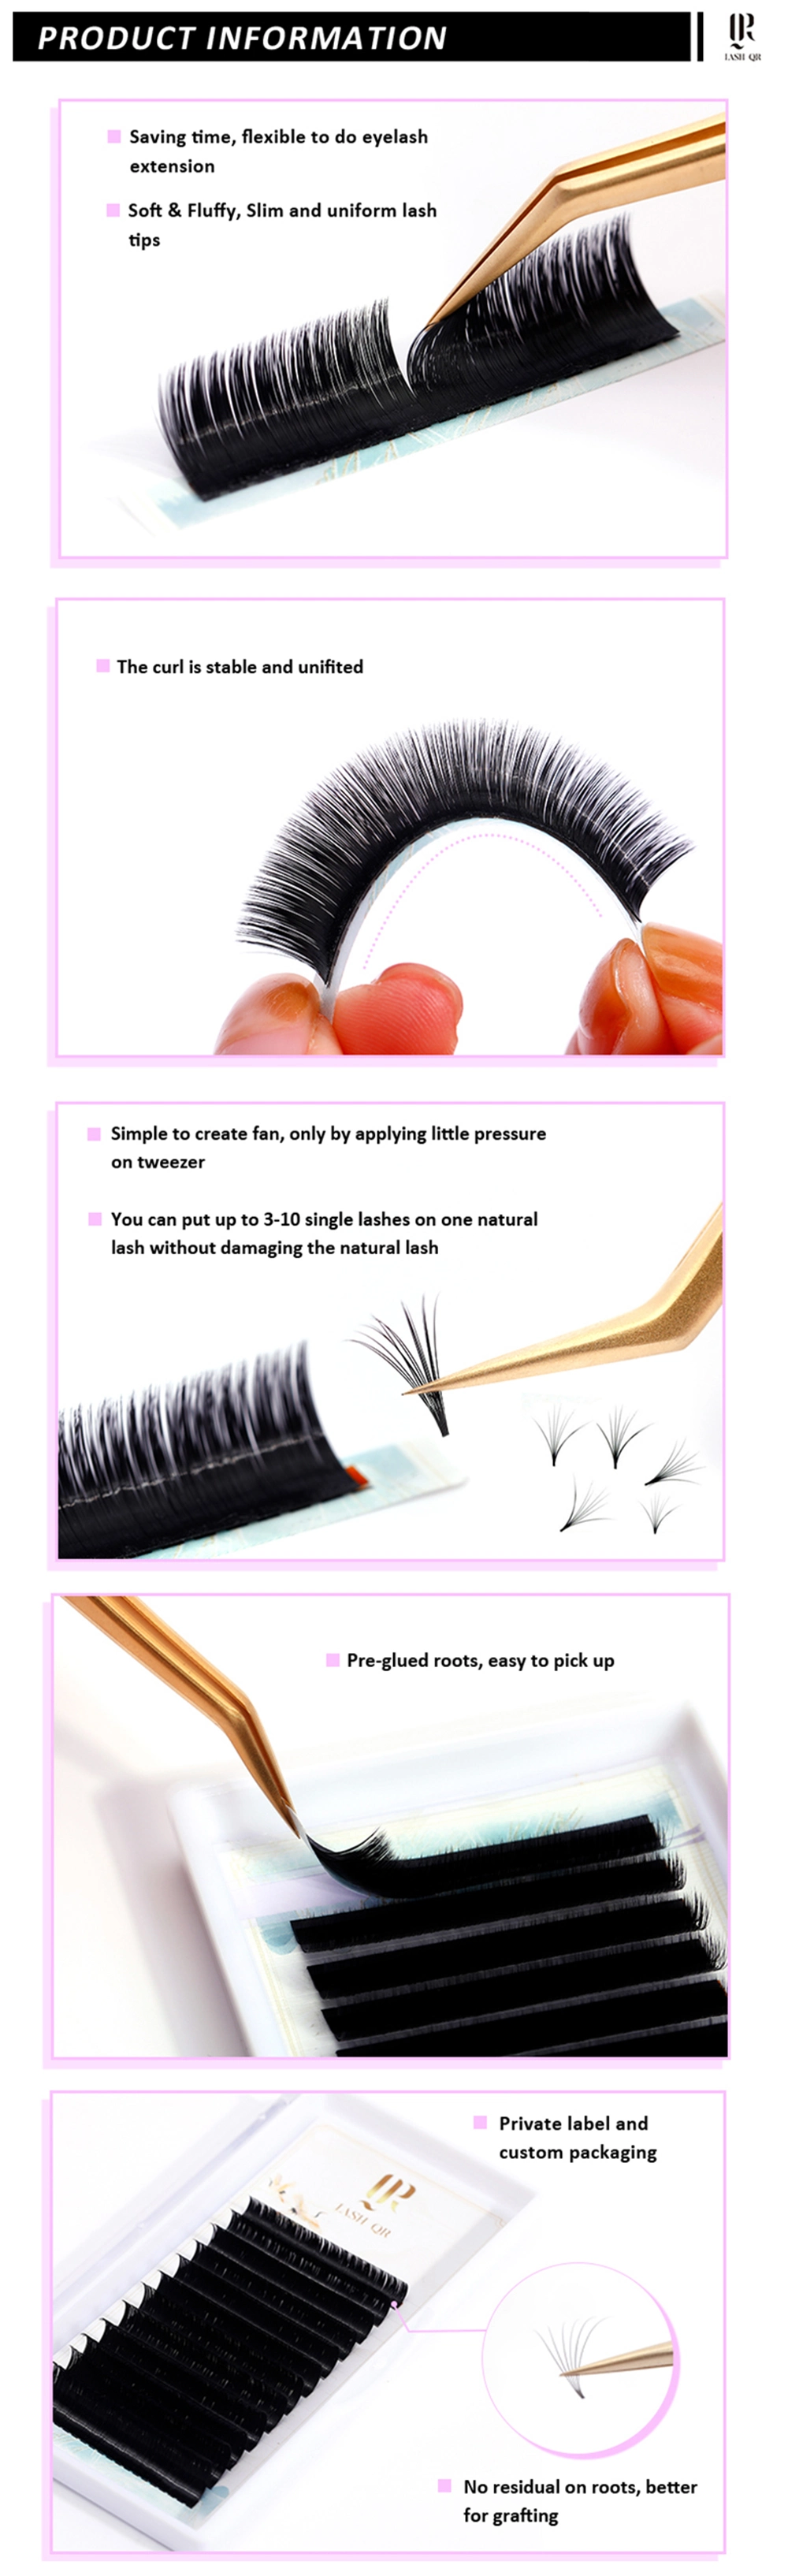 Easy Fan Volume Russian 2021 Best Eyelash Extension with 100% Handmade Factory Low Price Custom